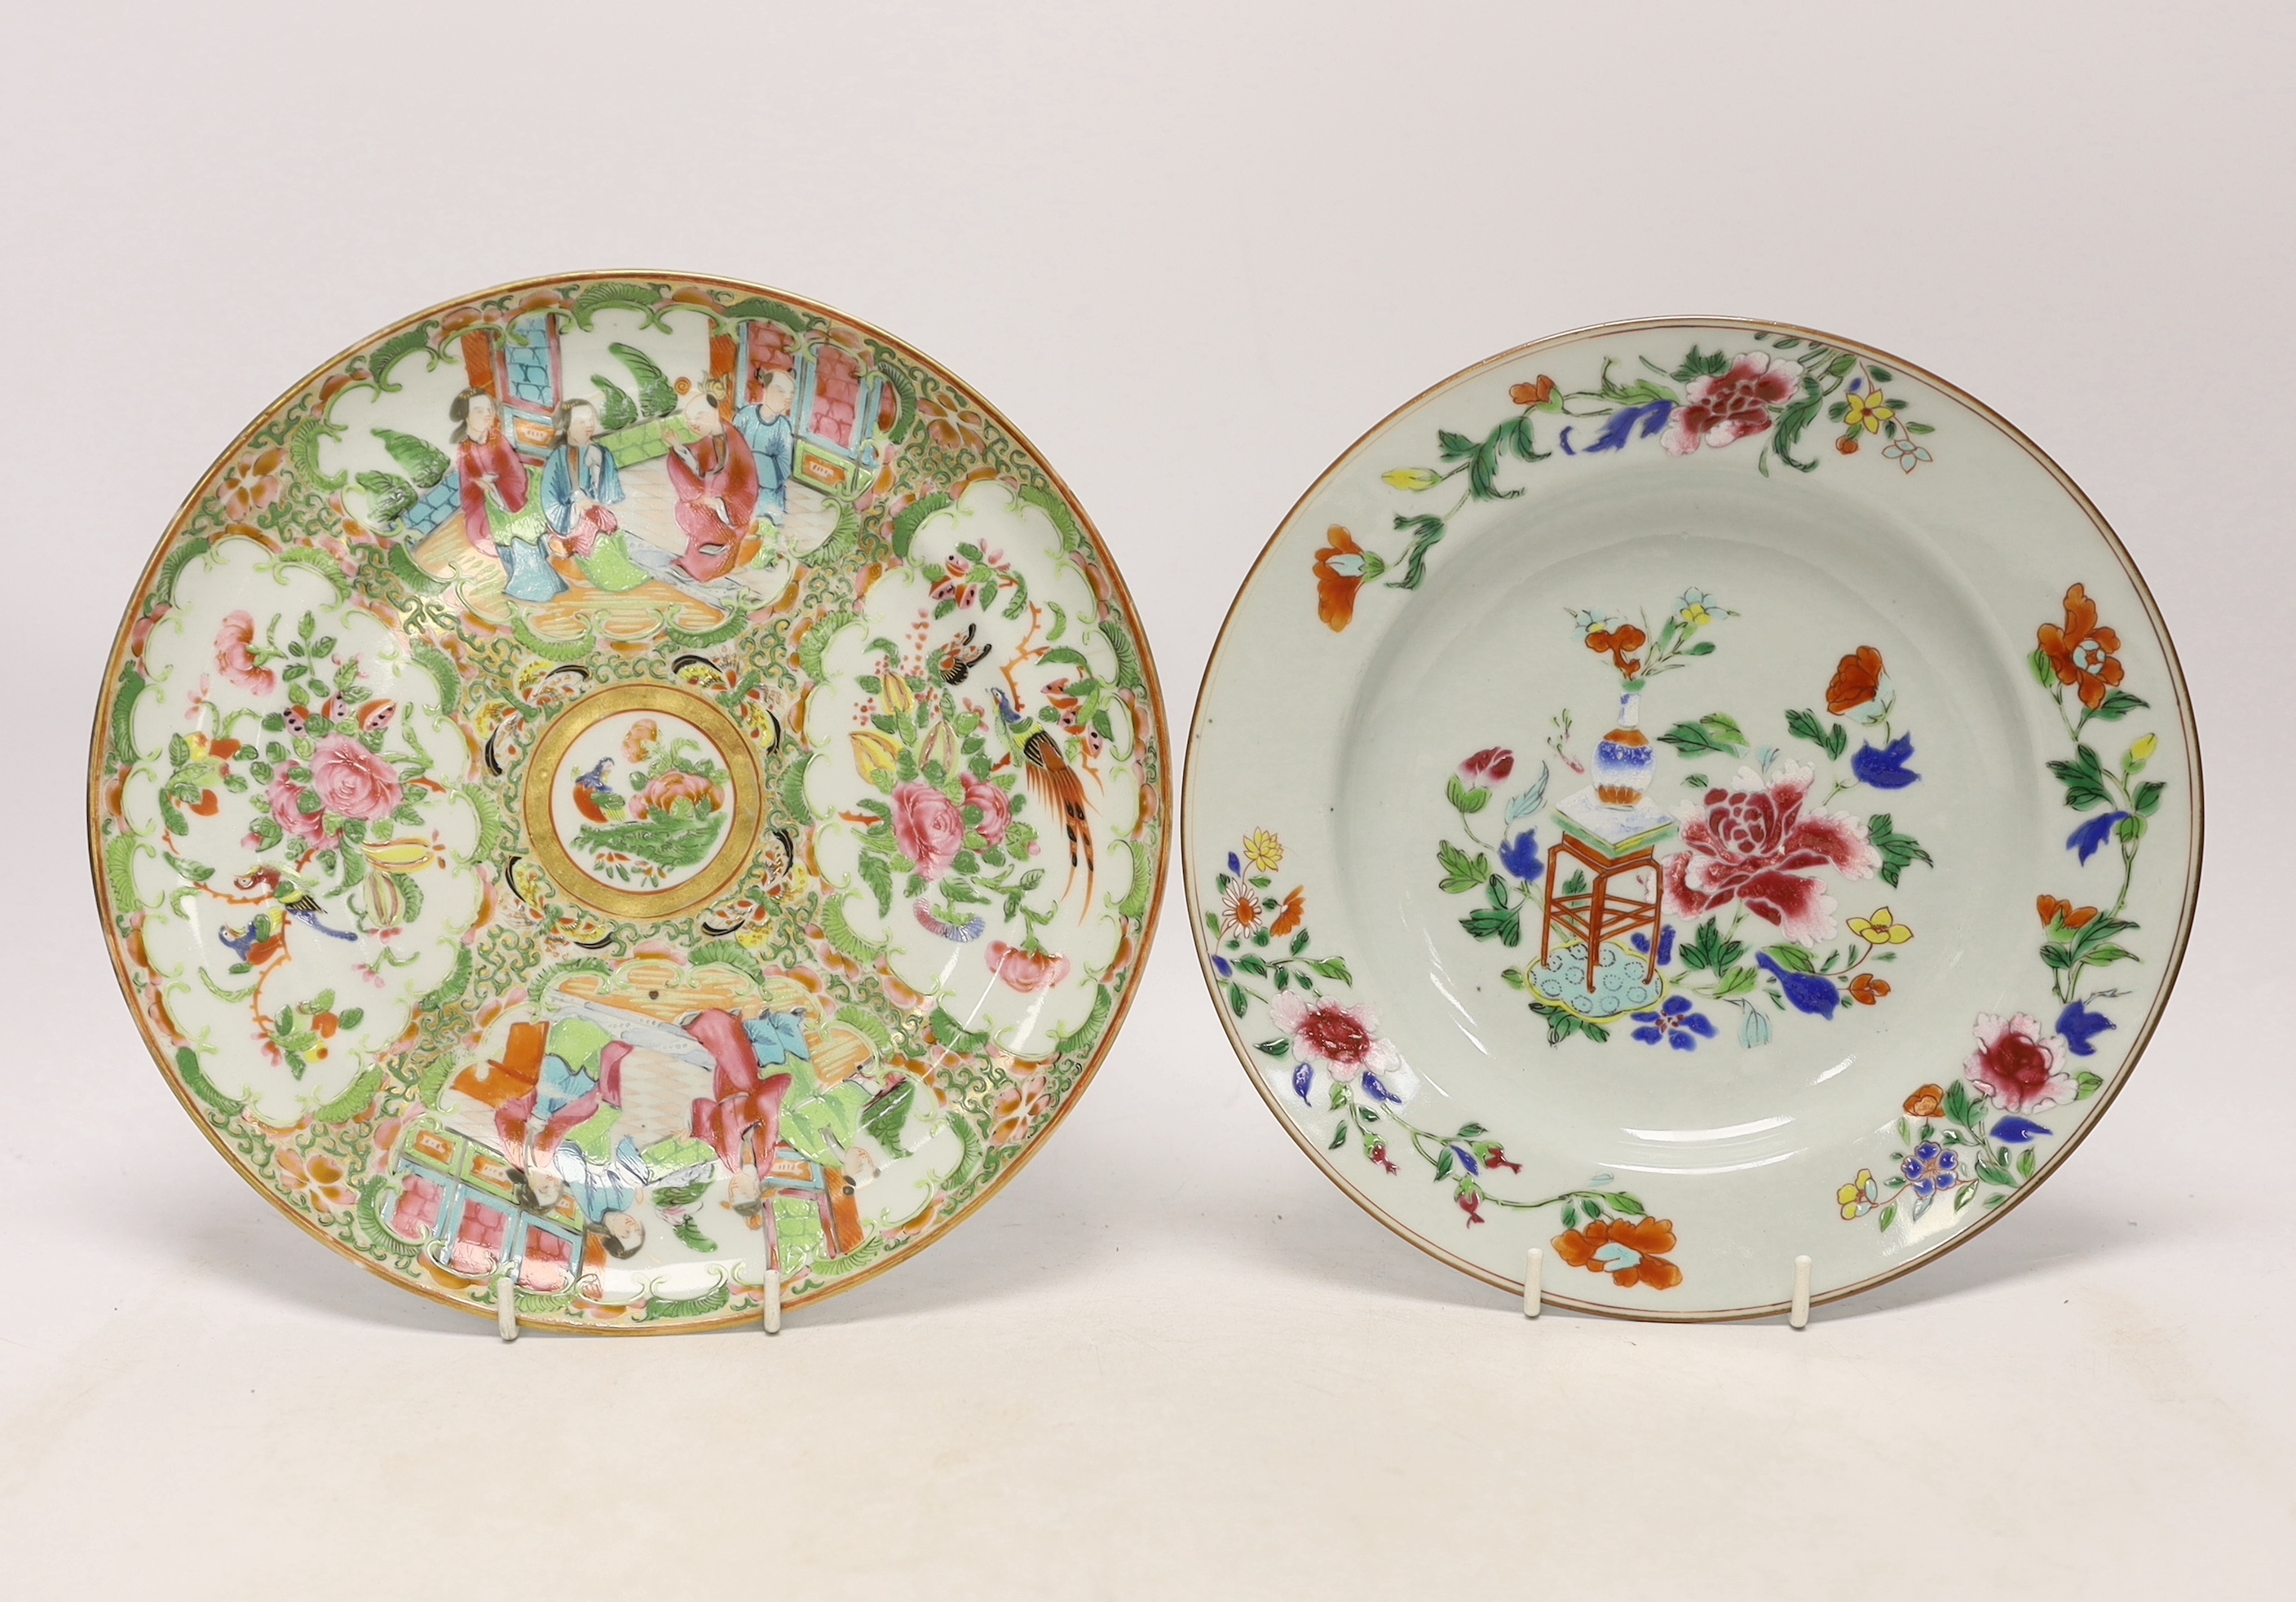 A late 18th century Chinese famille rose plate and a 19th century famille rose plate, largest 24.5cm in diameter